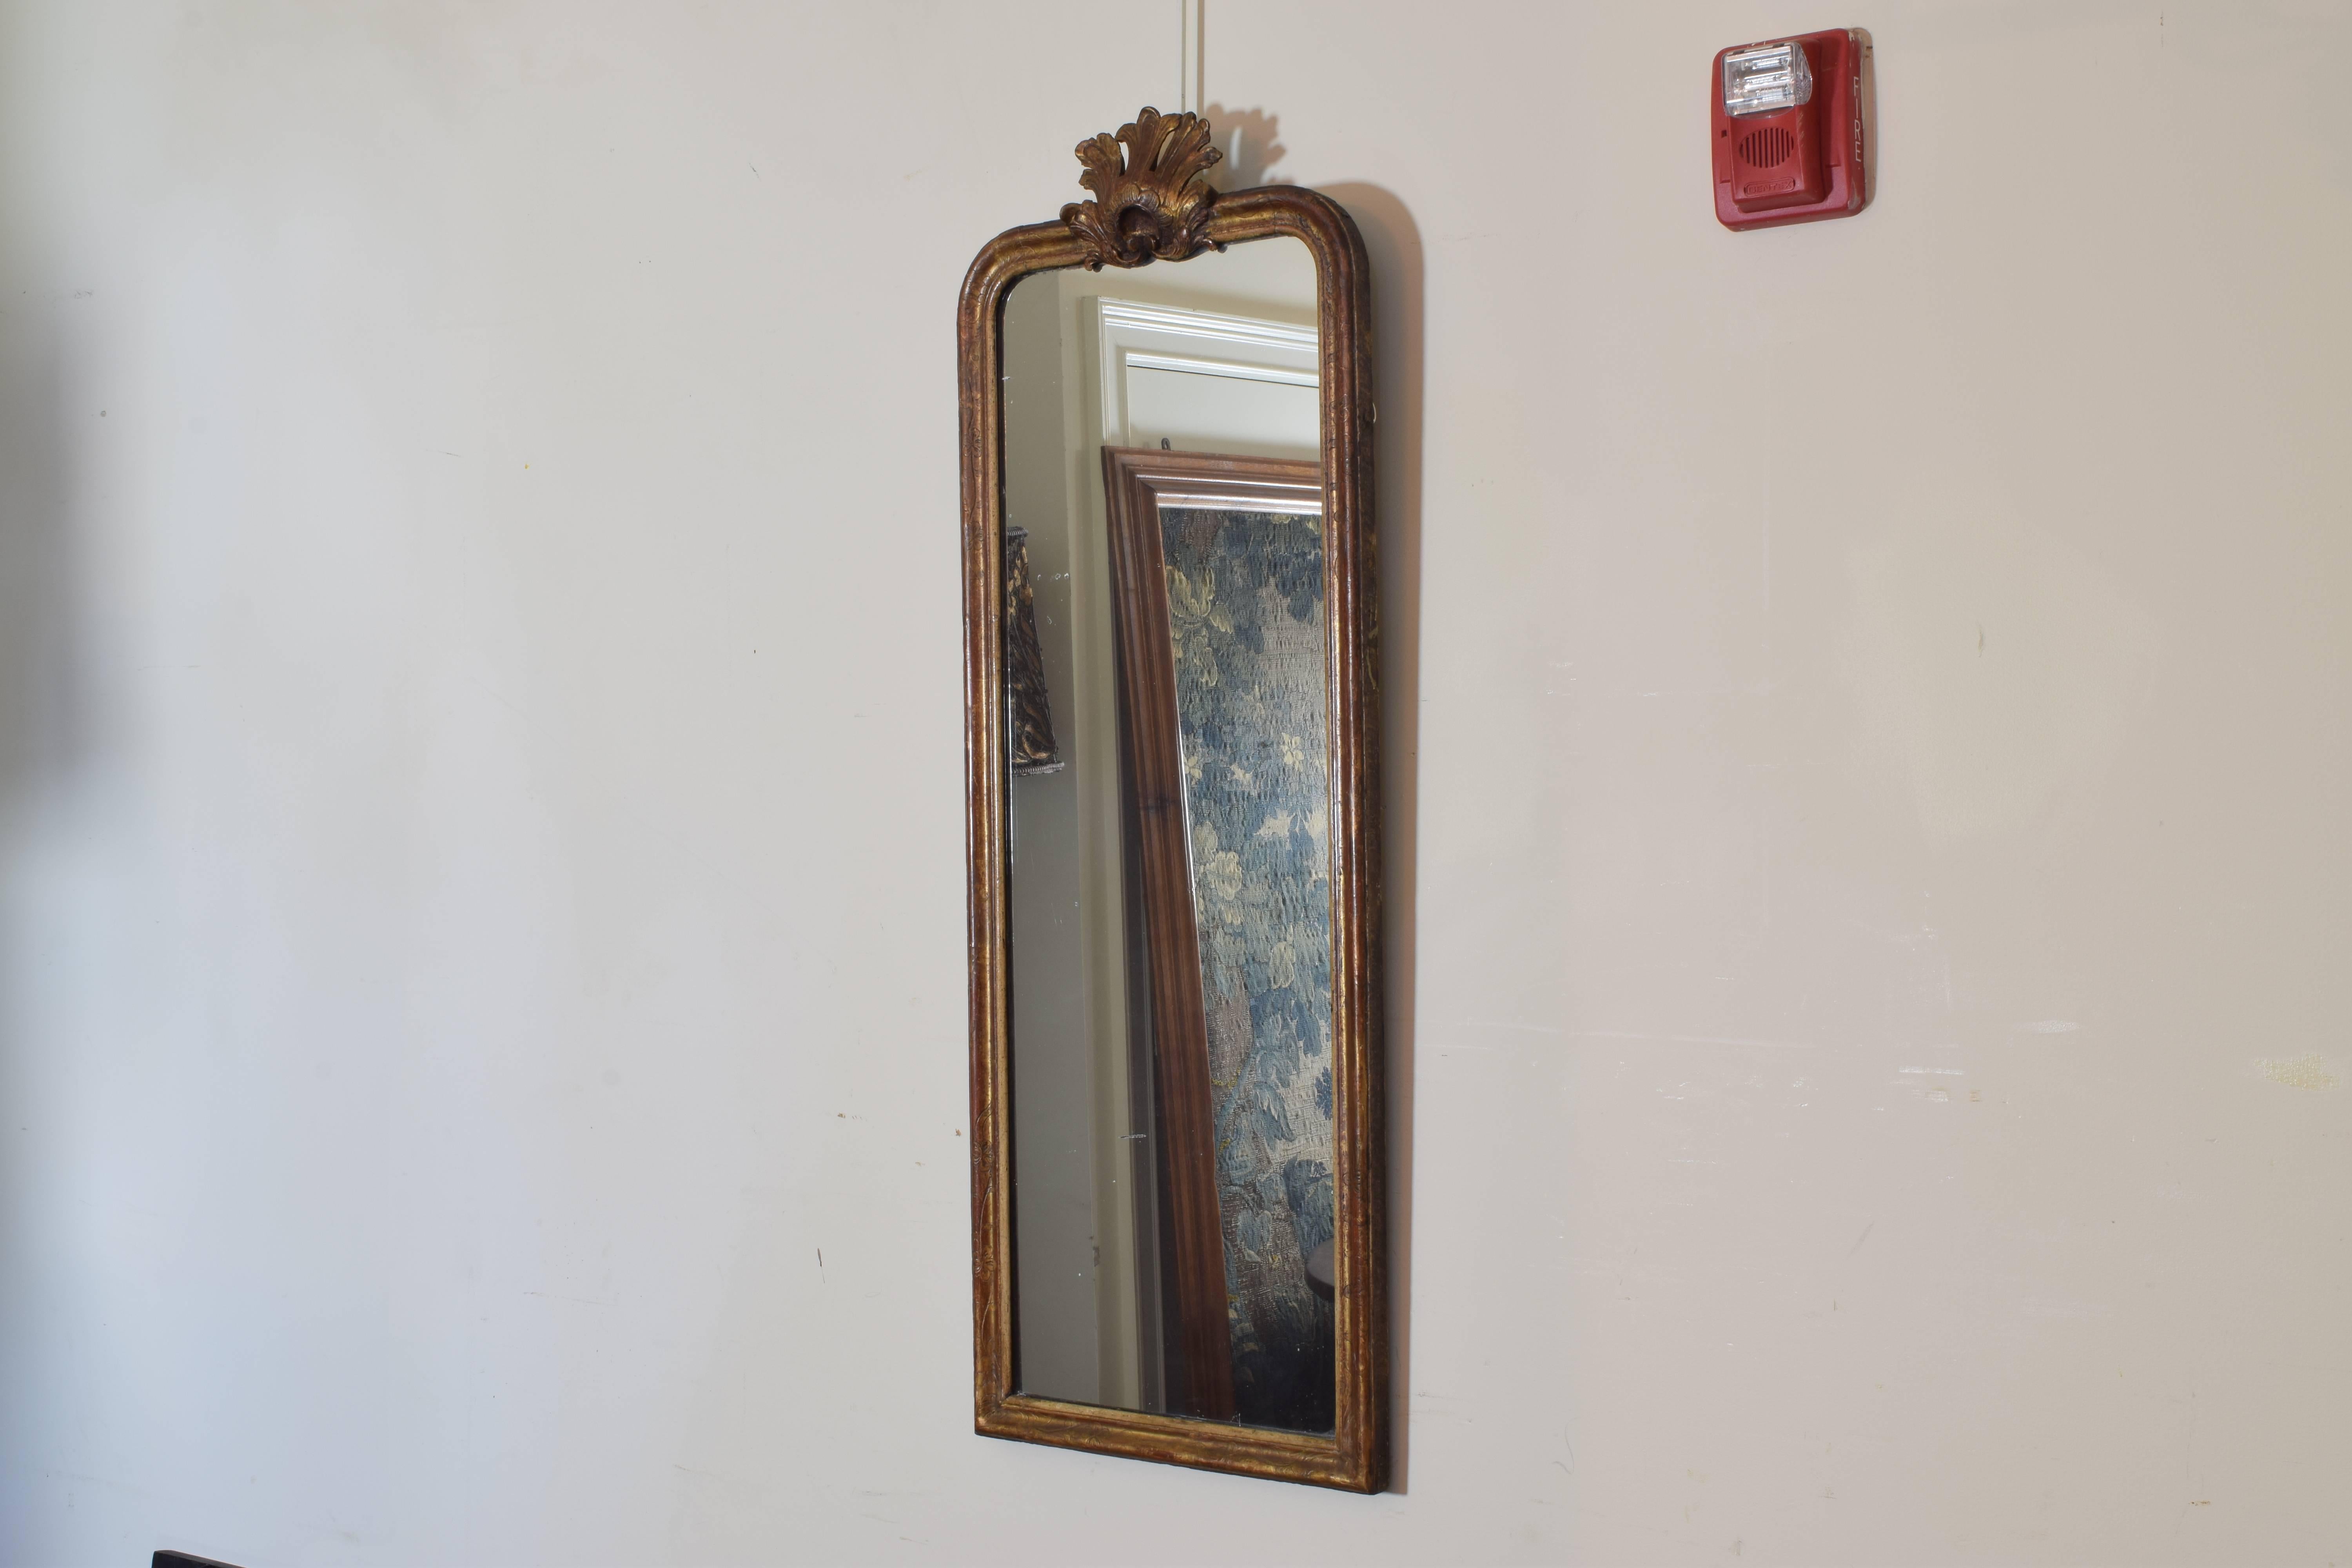 The slender mirror with a centered shell carving at the top.